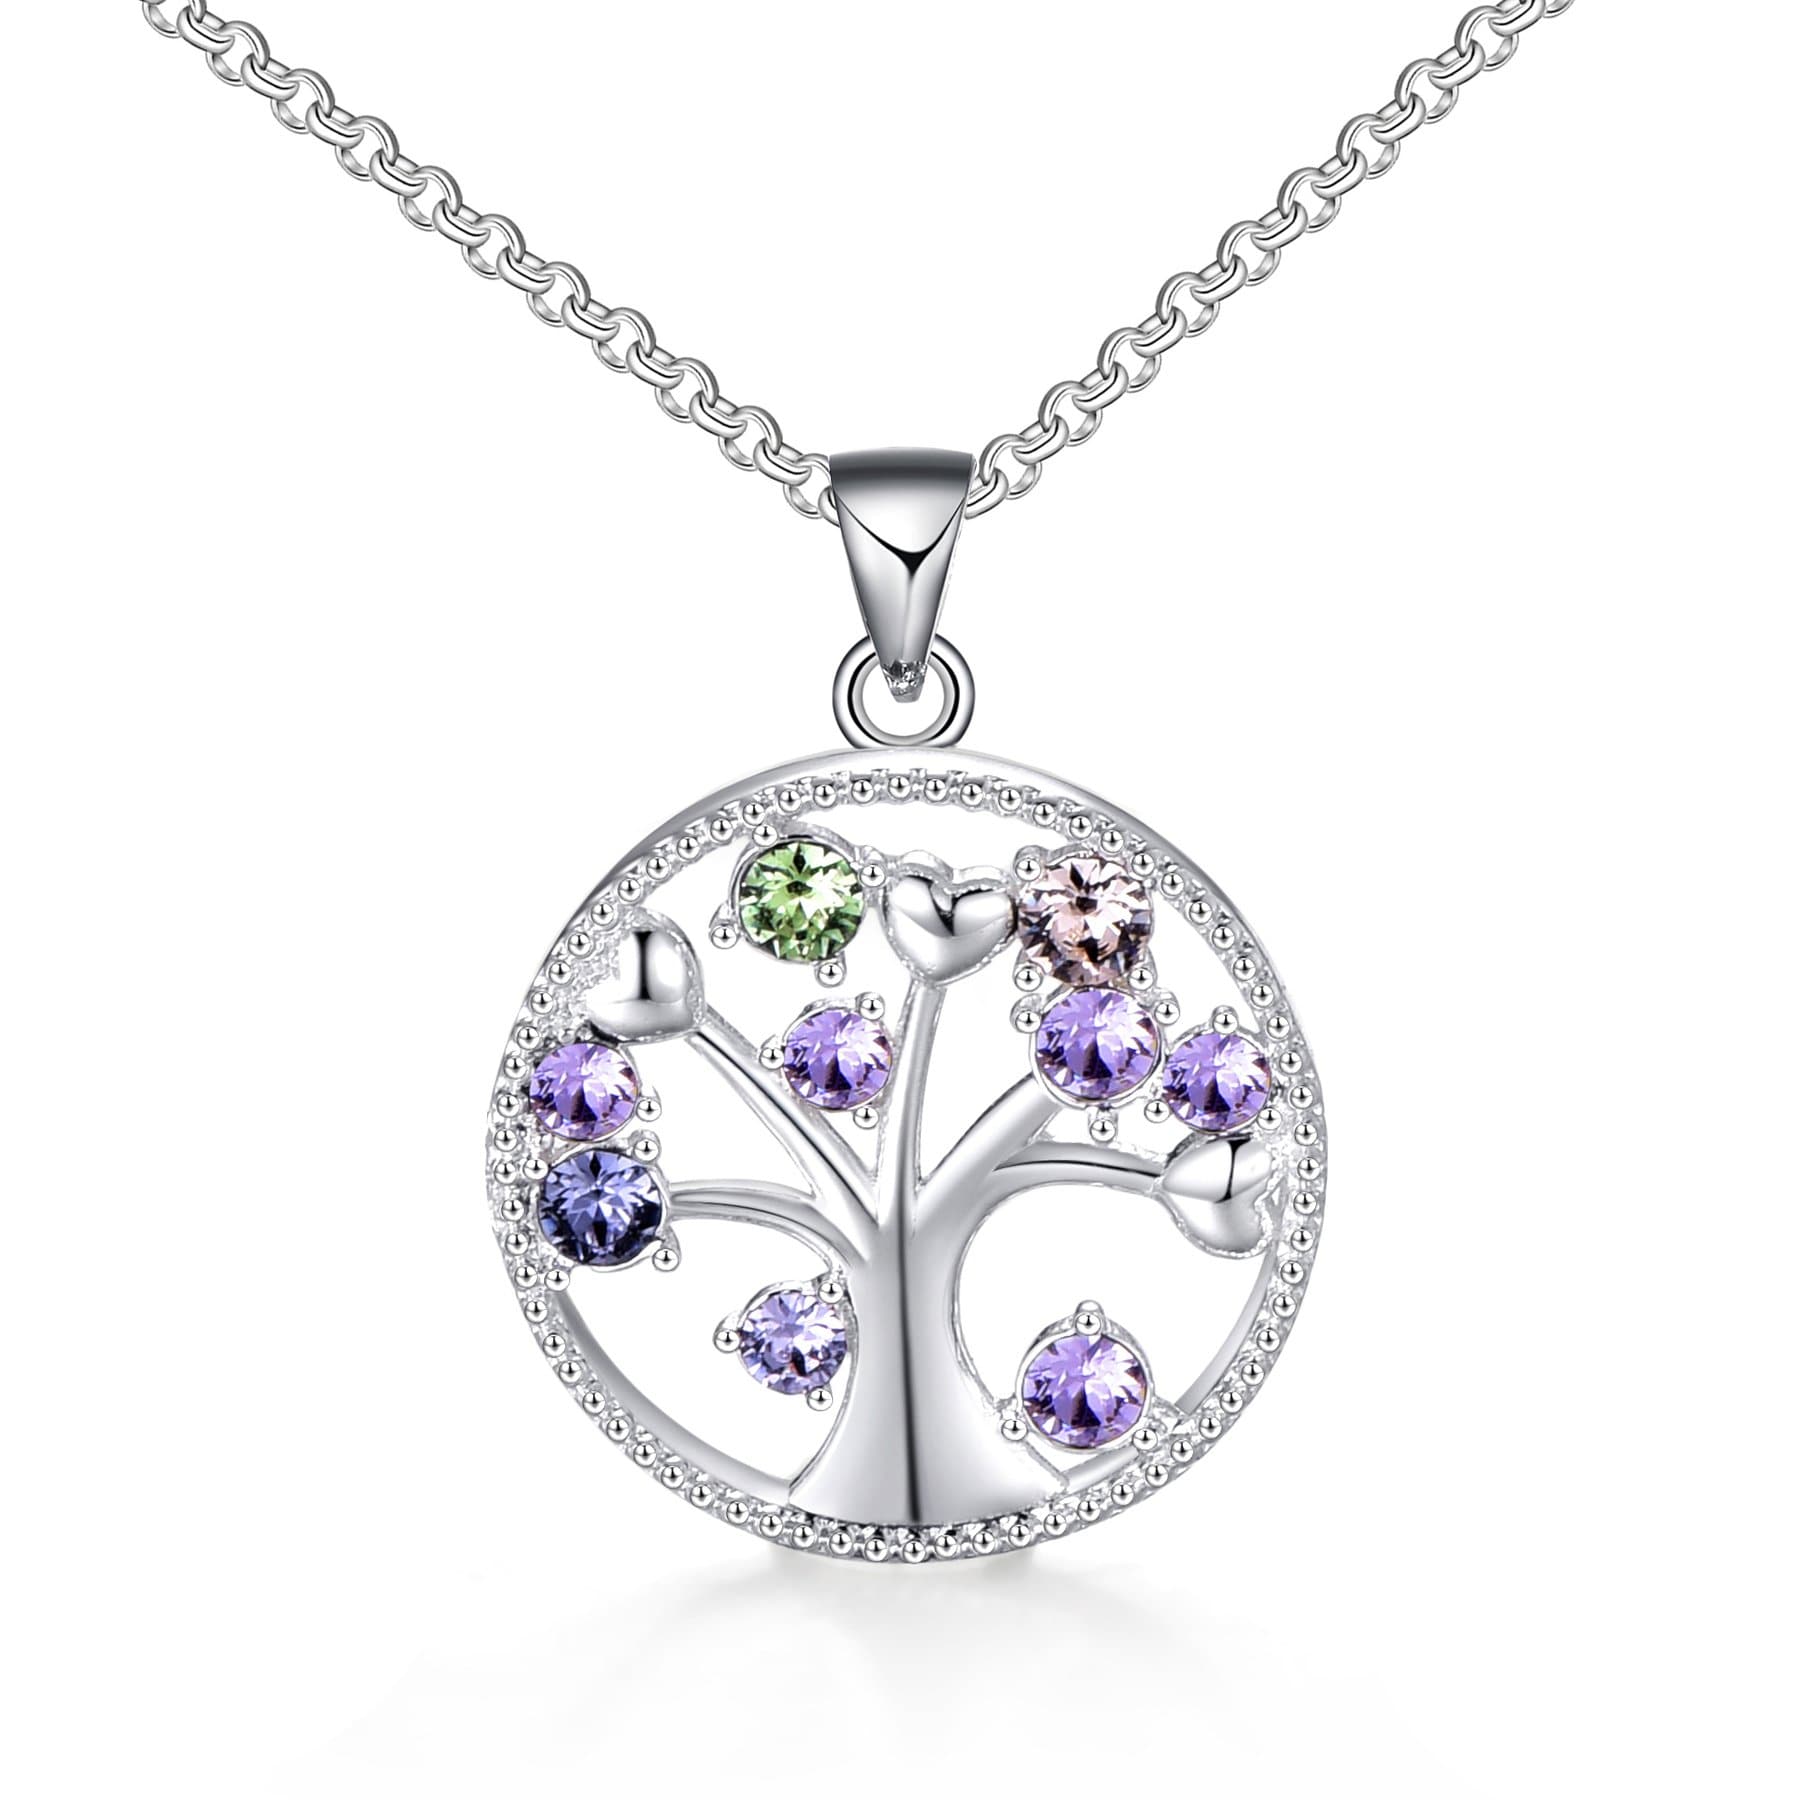 Silver Plated Chakra Tree of Life Necklace Created with Zircondia® Crystals by Philip Jones Jewellery